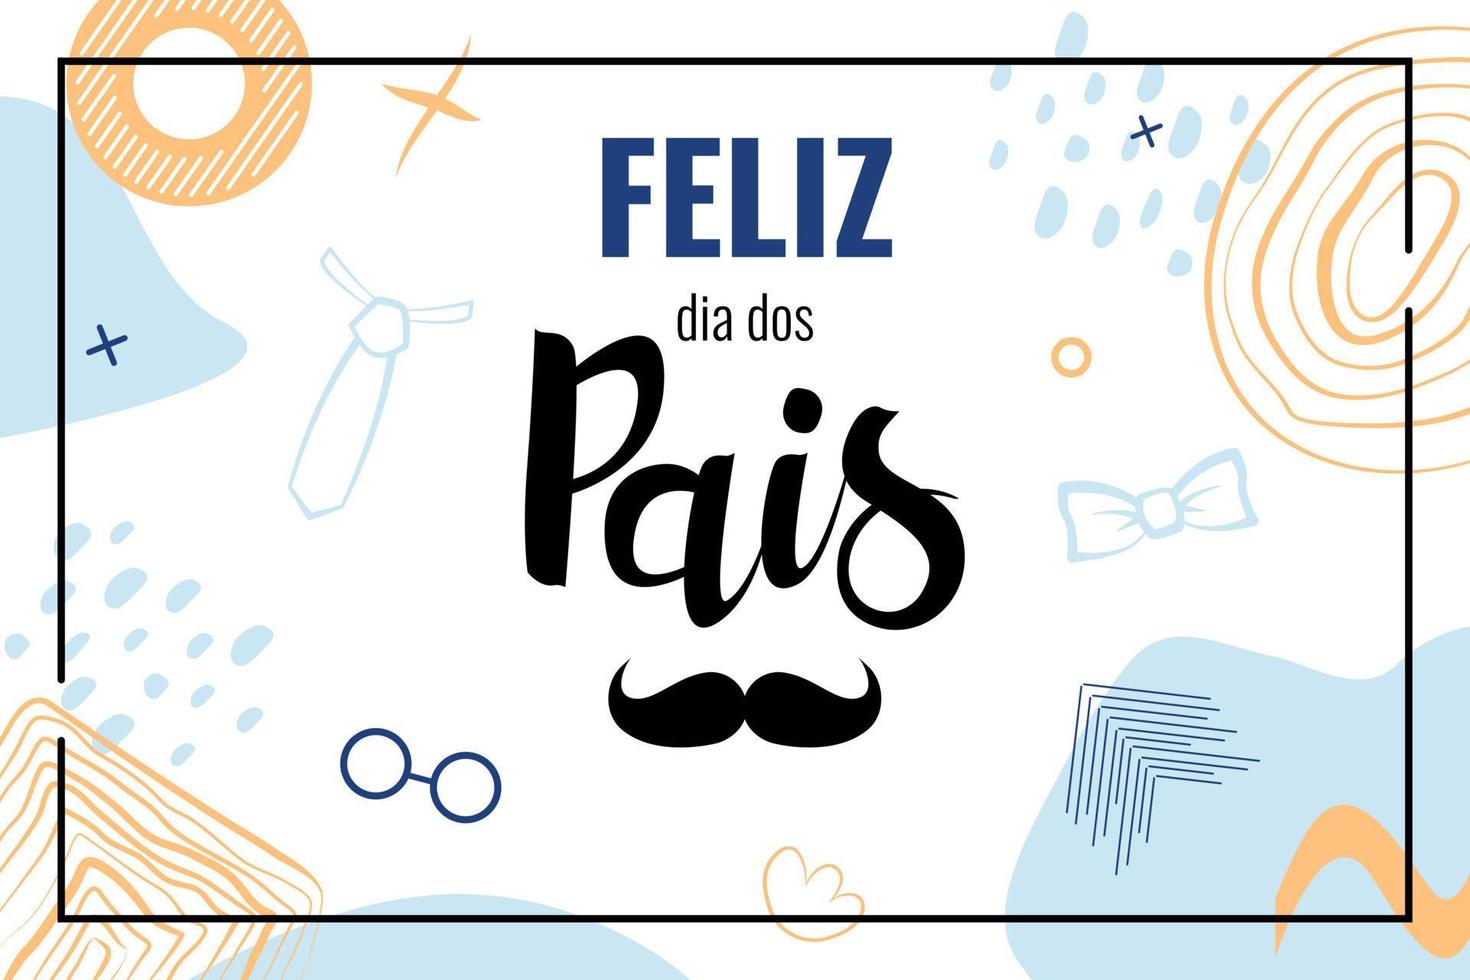 Feliz dia dos pais means Happy Father's Day in Brazil. Banner with ...